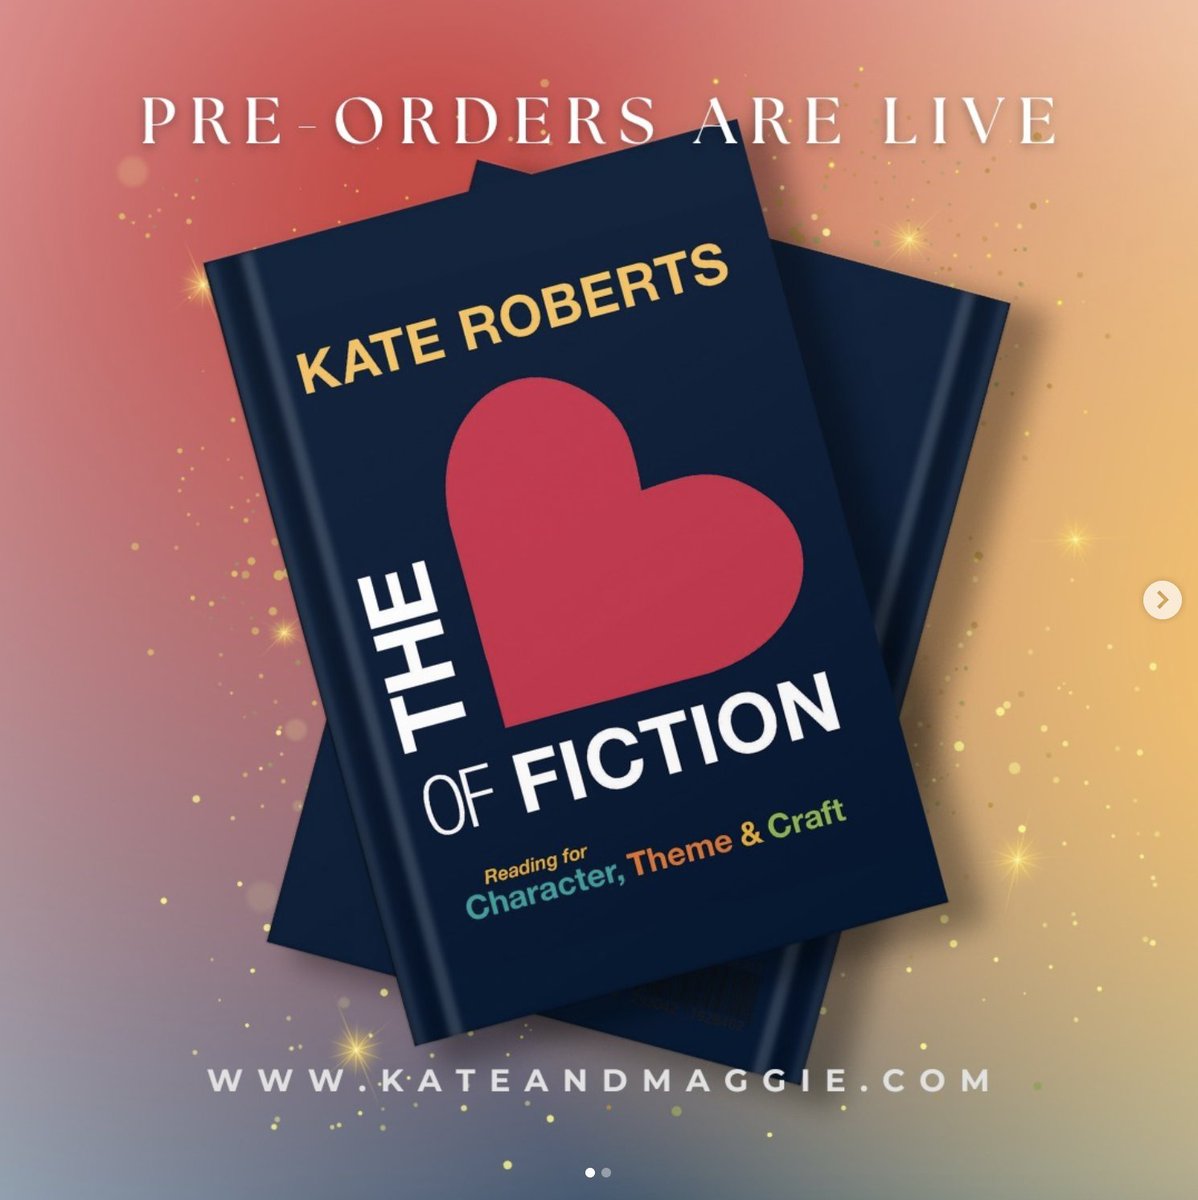 Thrilled that Kate Robert's new book, The Art of Fiction: Reading for Character, Theme & Craft, is available for preorder! Details: kateandmaggie.com @teachkate